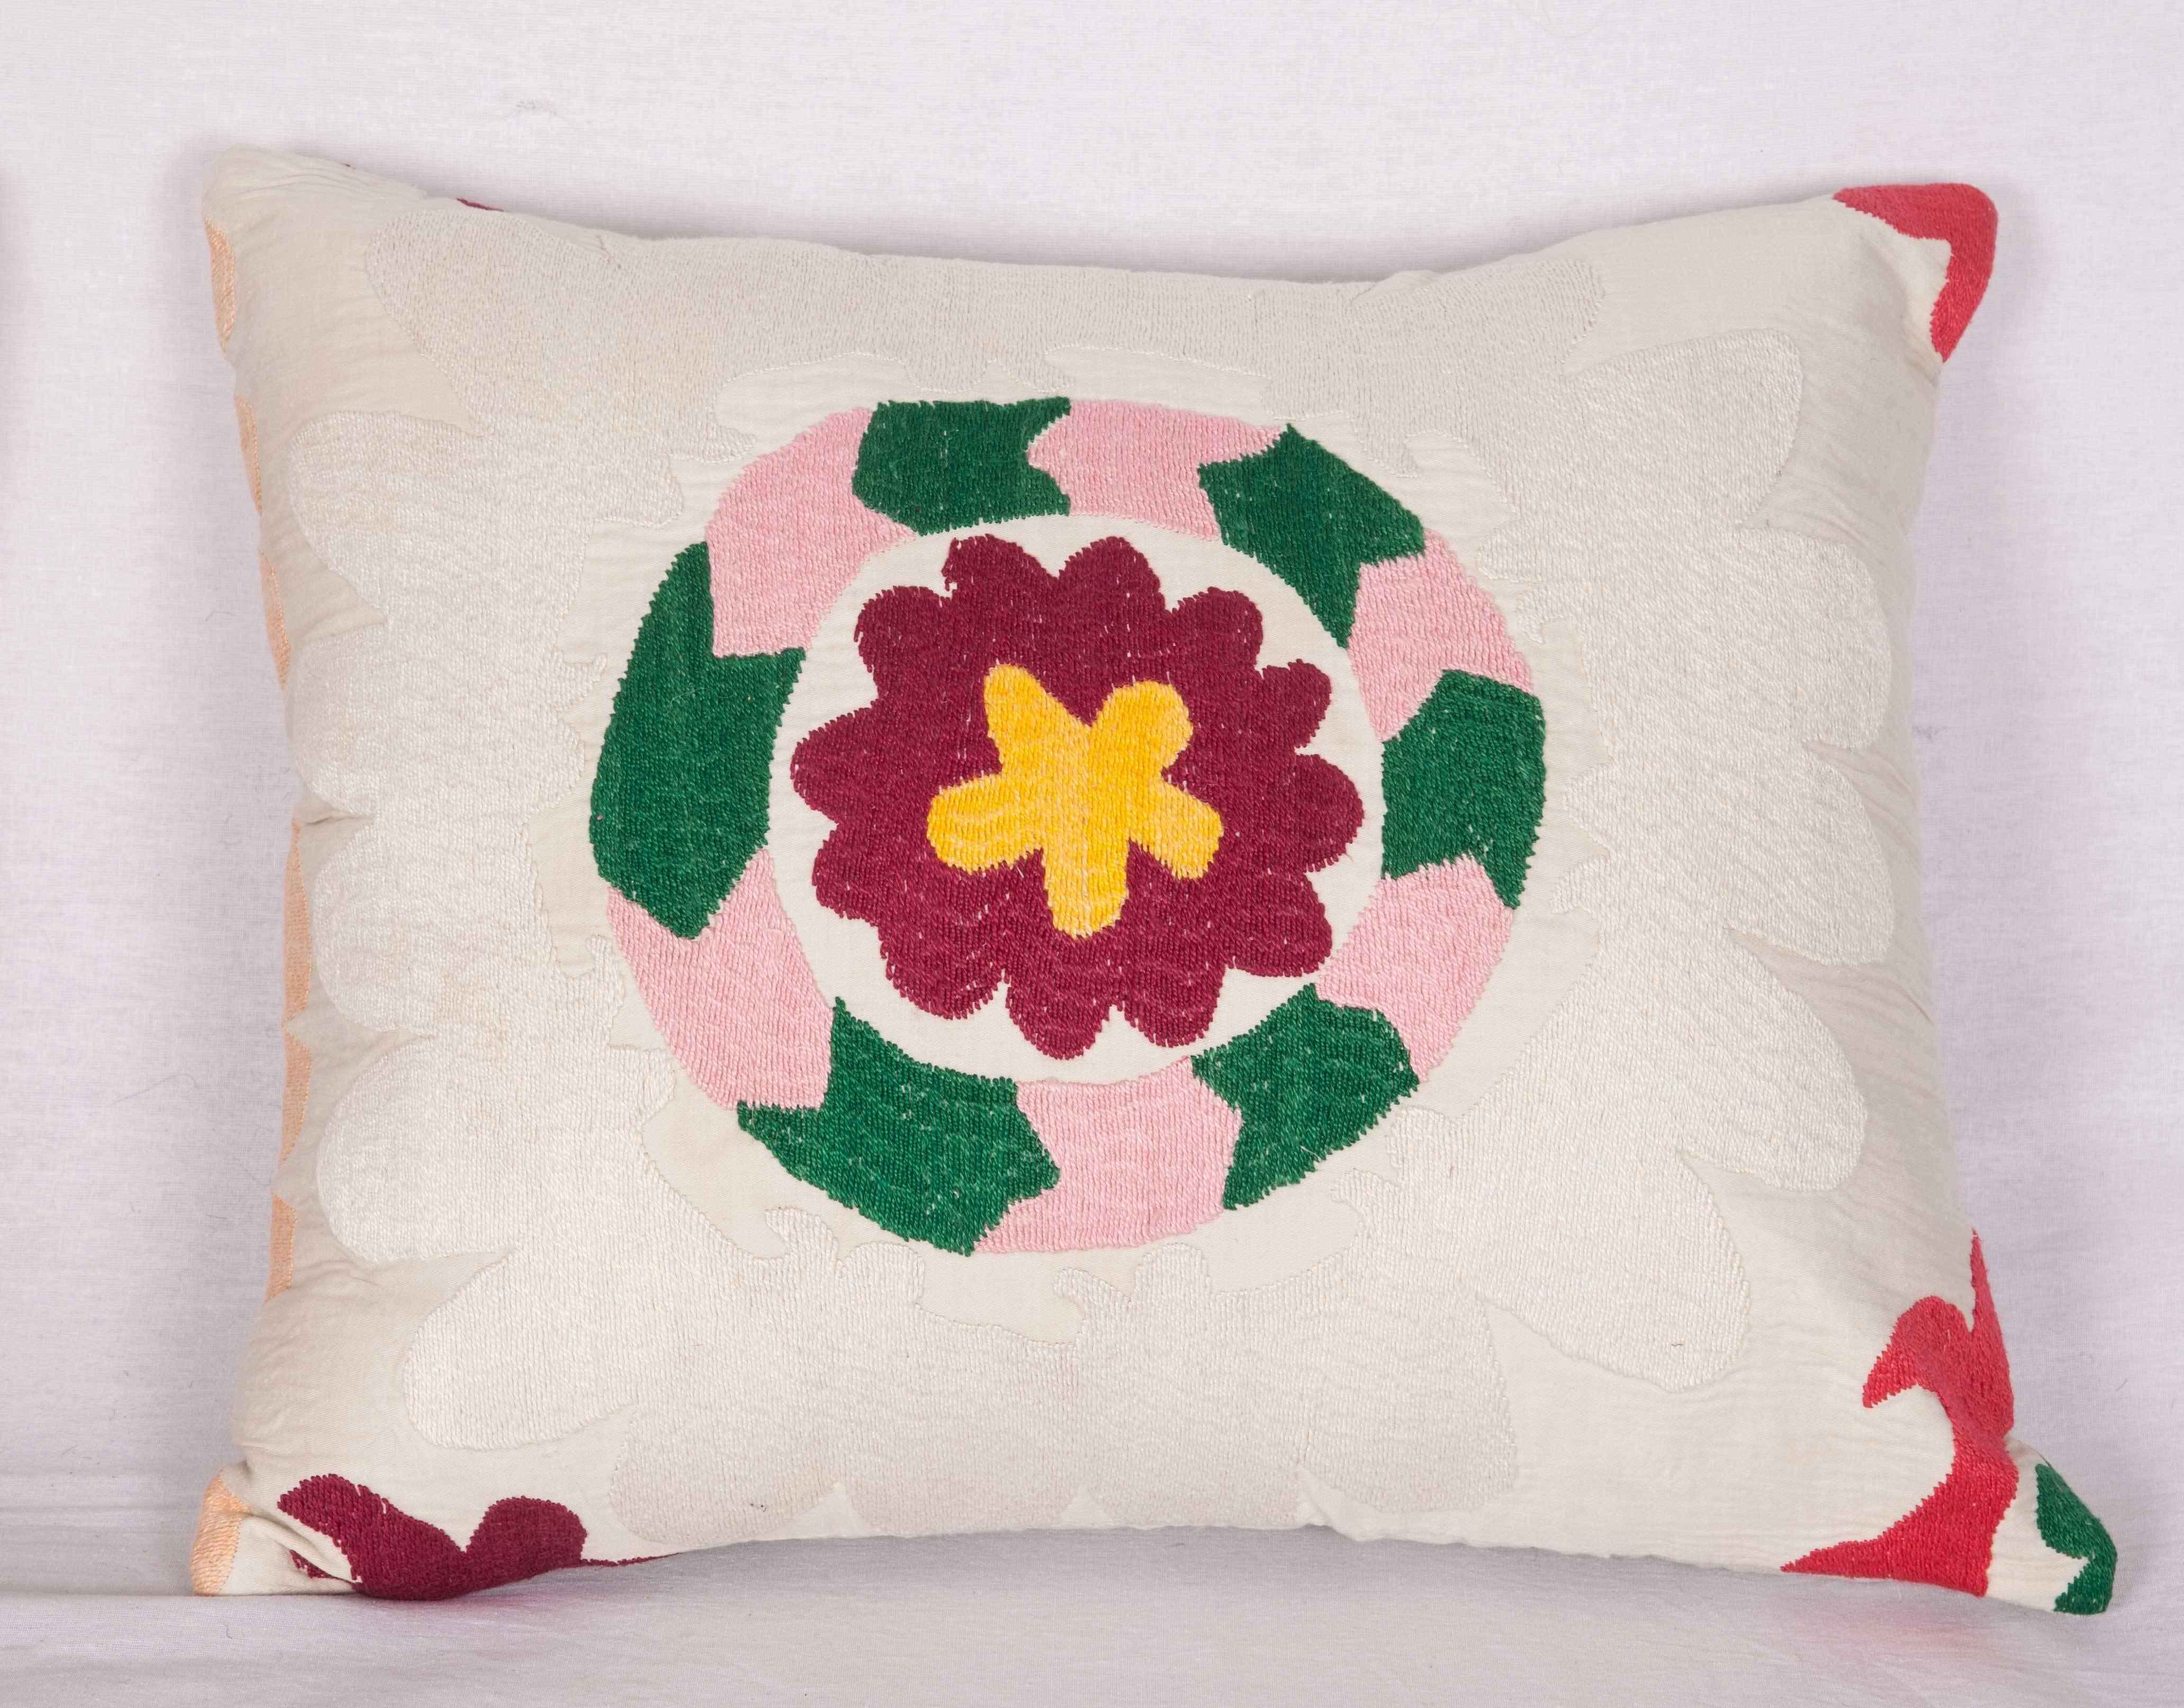 The pillows are made out of vintage Tajik Suzani. They do not come with an insert but they come with a bag made to the size and out of cotton to accommodate the filling. The backing is made of linen. Please note filling is not provided. Since the